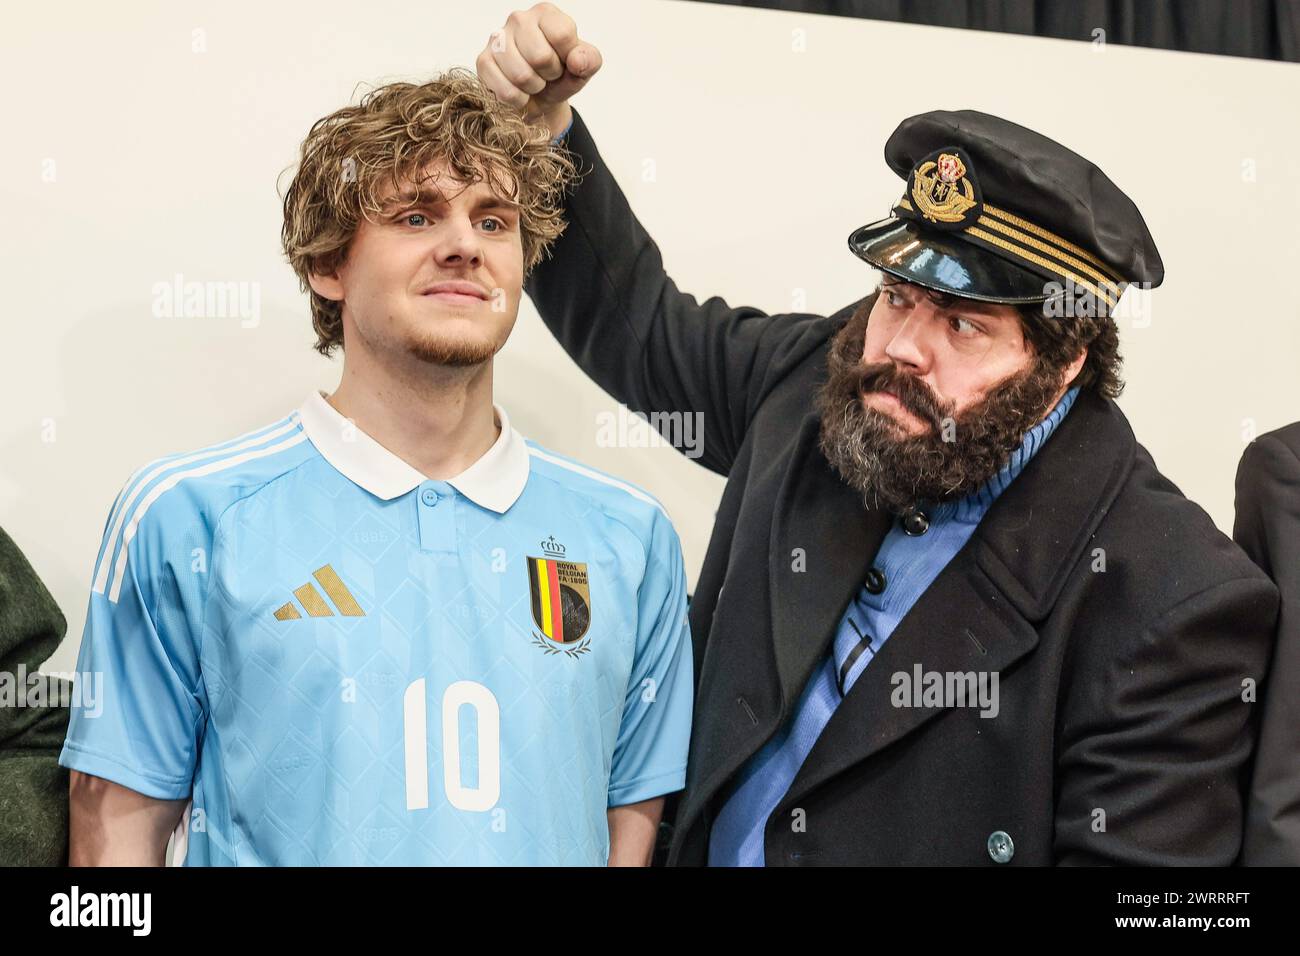 A man dressed as cartoon character Captain Haddock (R) pretends to hit one of the models showing the home and away outfits, during a press conference of Belgian national soccer team Red Devils to present the new shirts for the UEFA Euro 2024 European Championship, Thursday 14 March 2024, at the Musee Herge in Louvain-la-Neuve. The new outfit, with light blue shirt with white collar, combined with brown shorts, refers to the iconic outfit of Kuifje - Tintin, the world-famous Belgian reporter-adventurer from the Herge comic books. BELGA PHOTO BRUNO FAHY Stock Photo